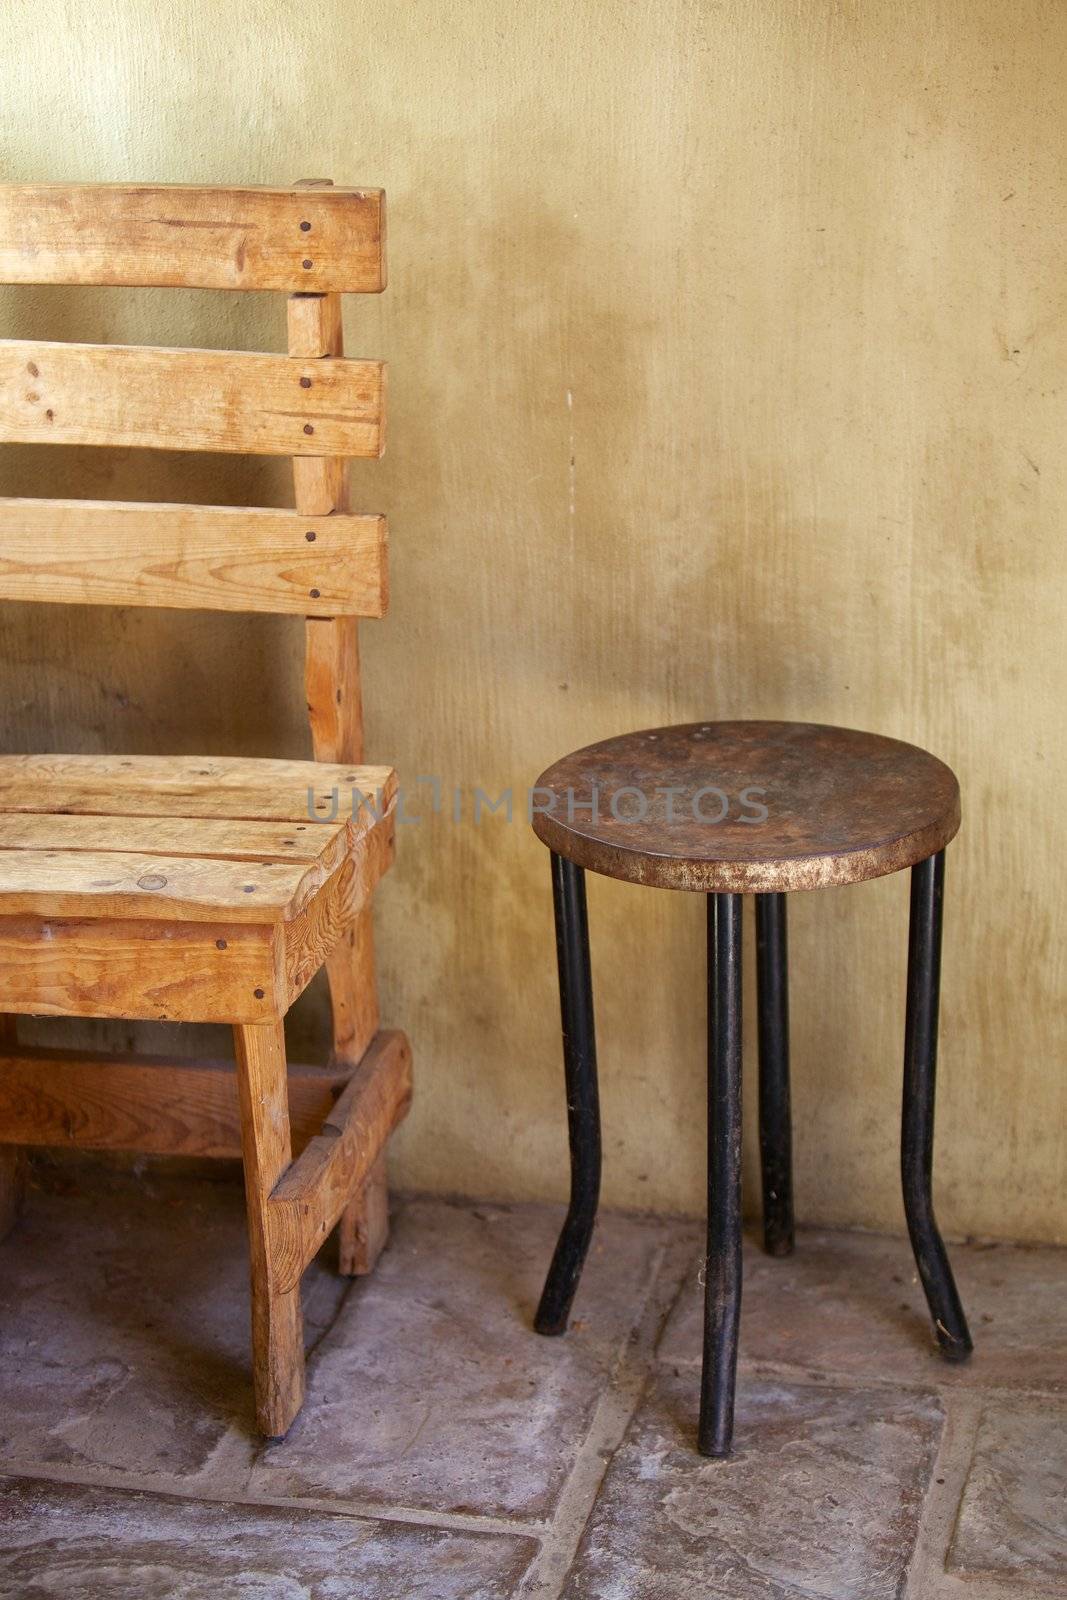 Country rustic chair and table, homestead